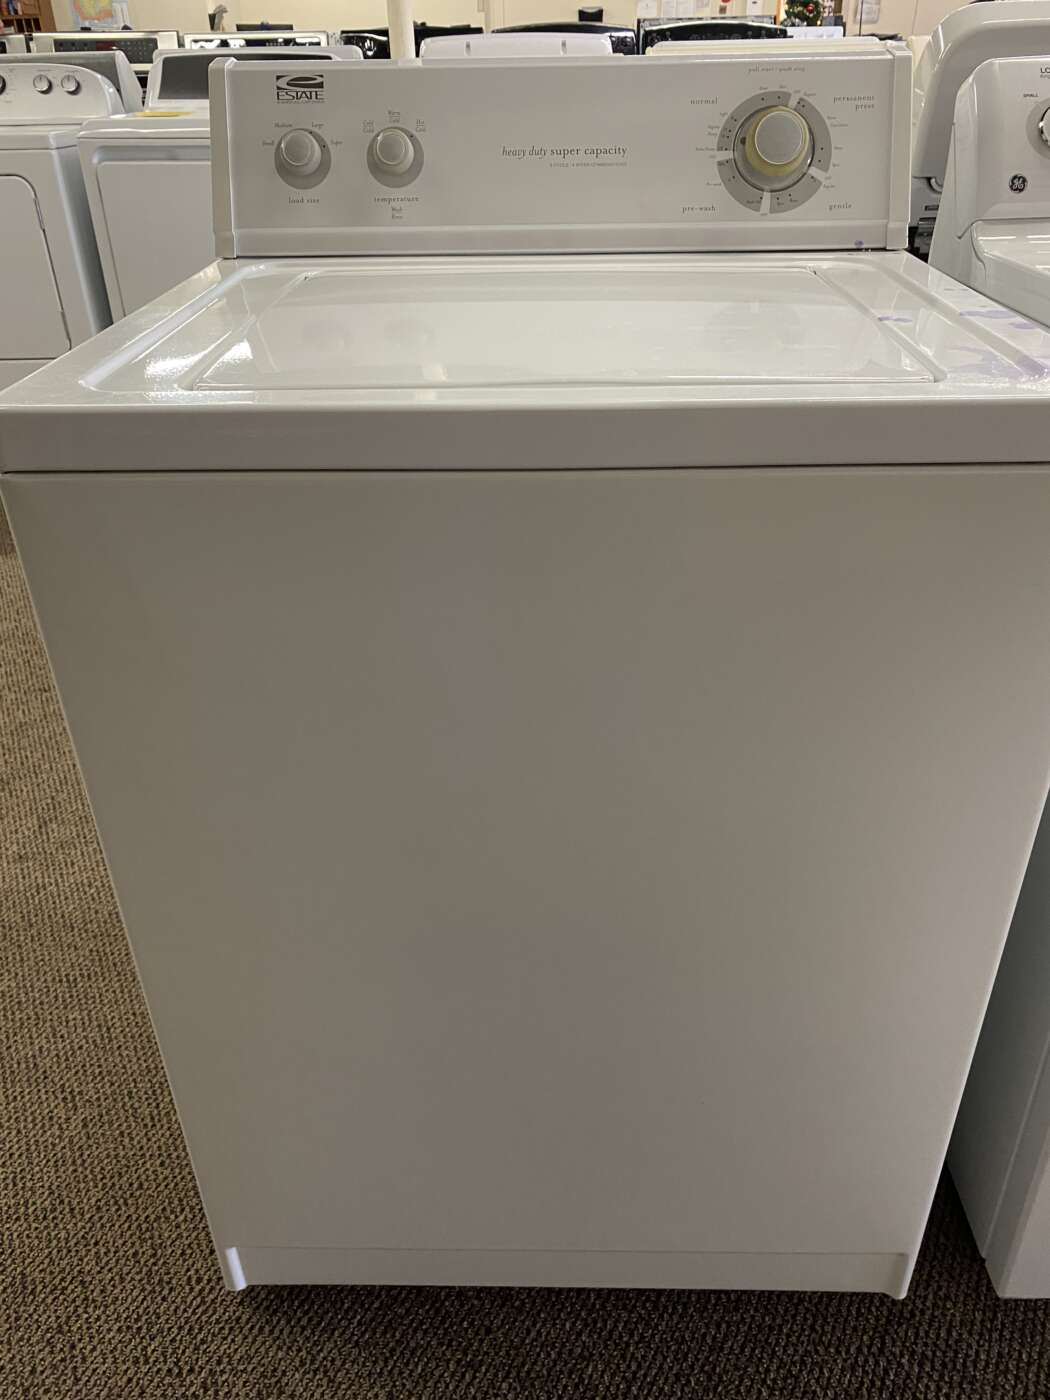 Reconditioned ESTATE 3.2 Cu. Ft. Top-Load Washer – White